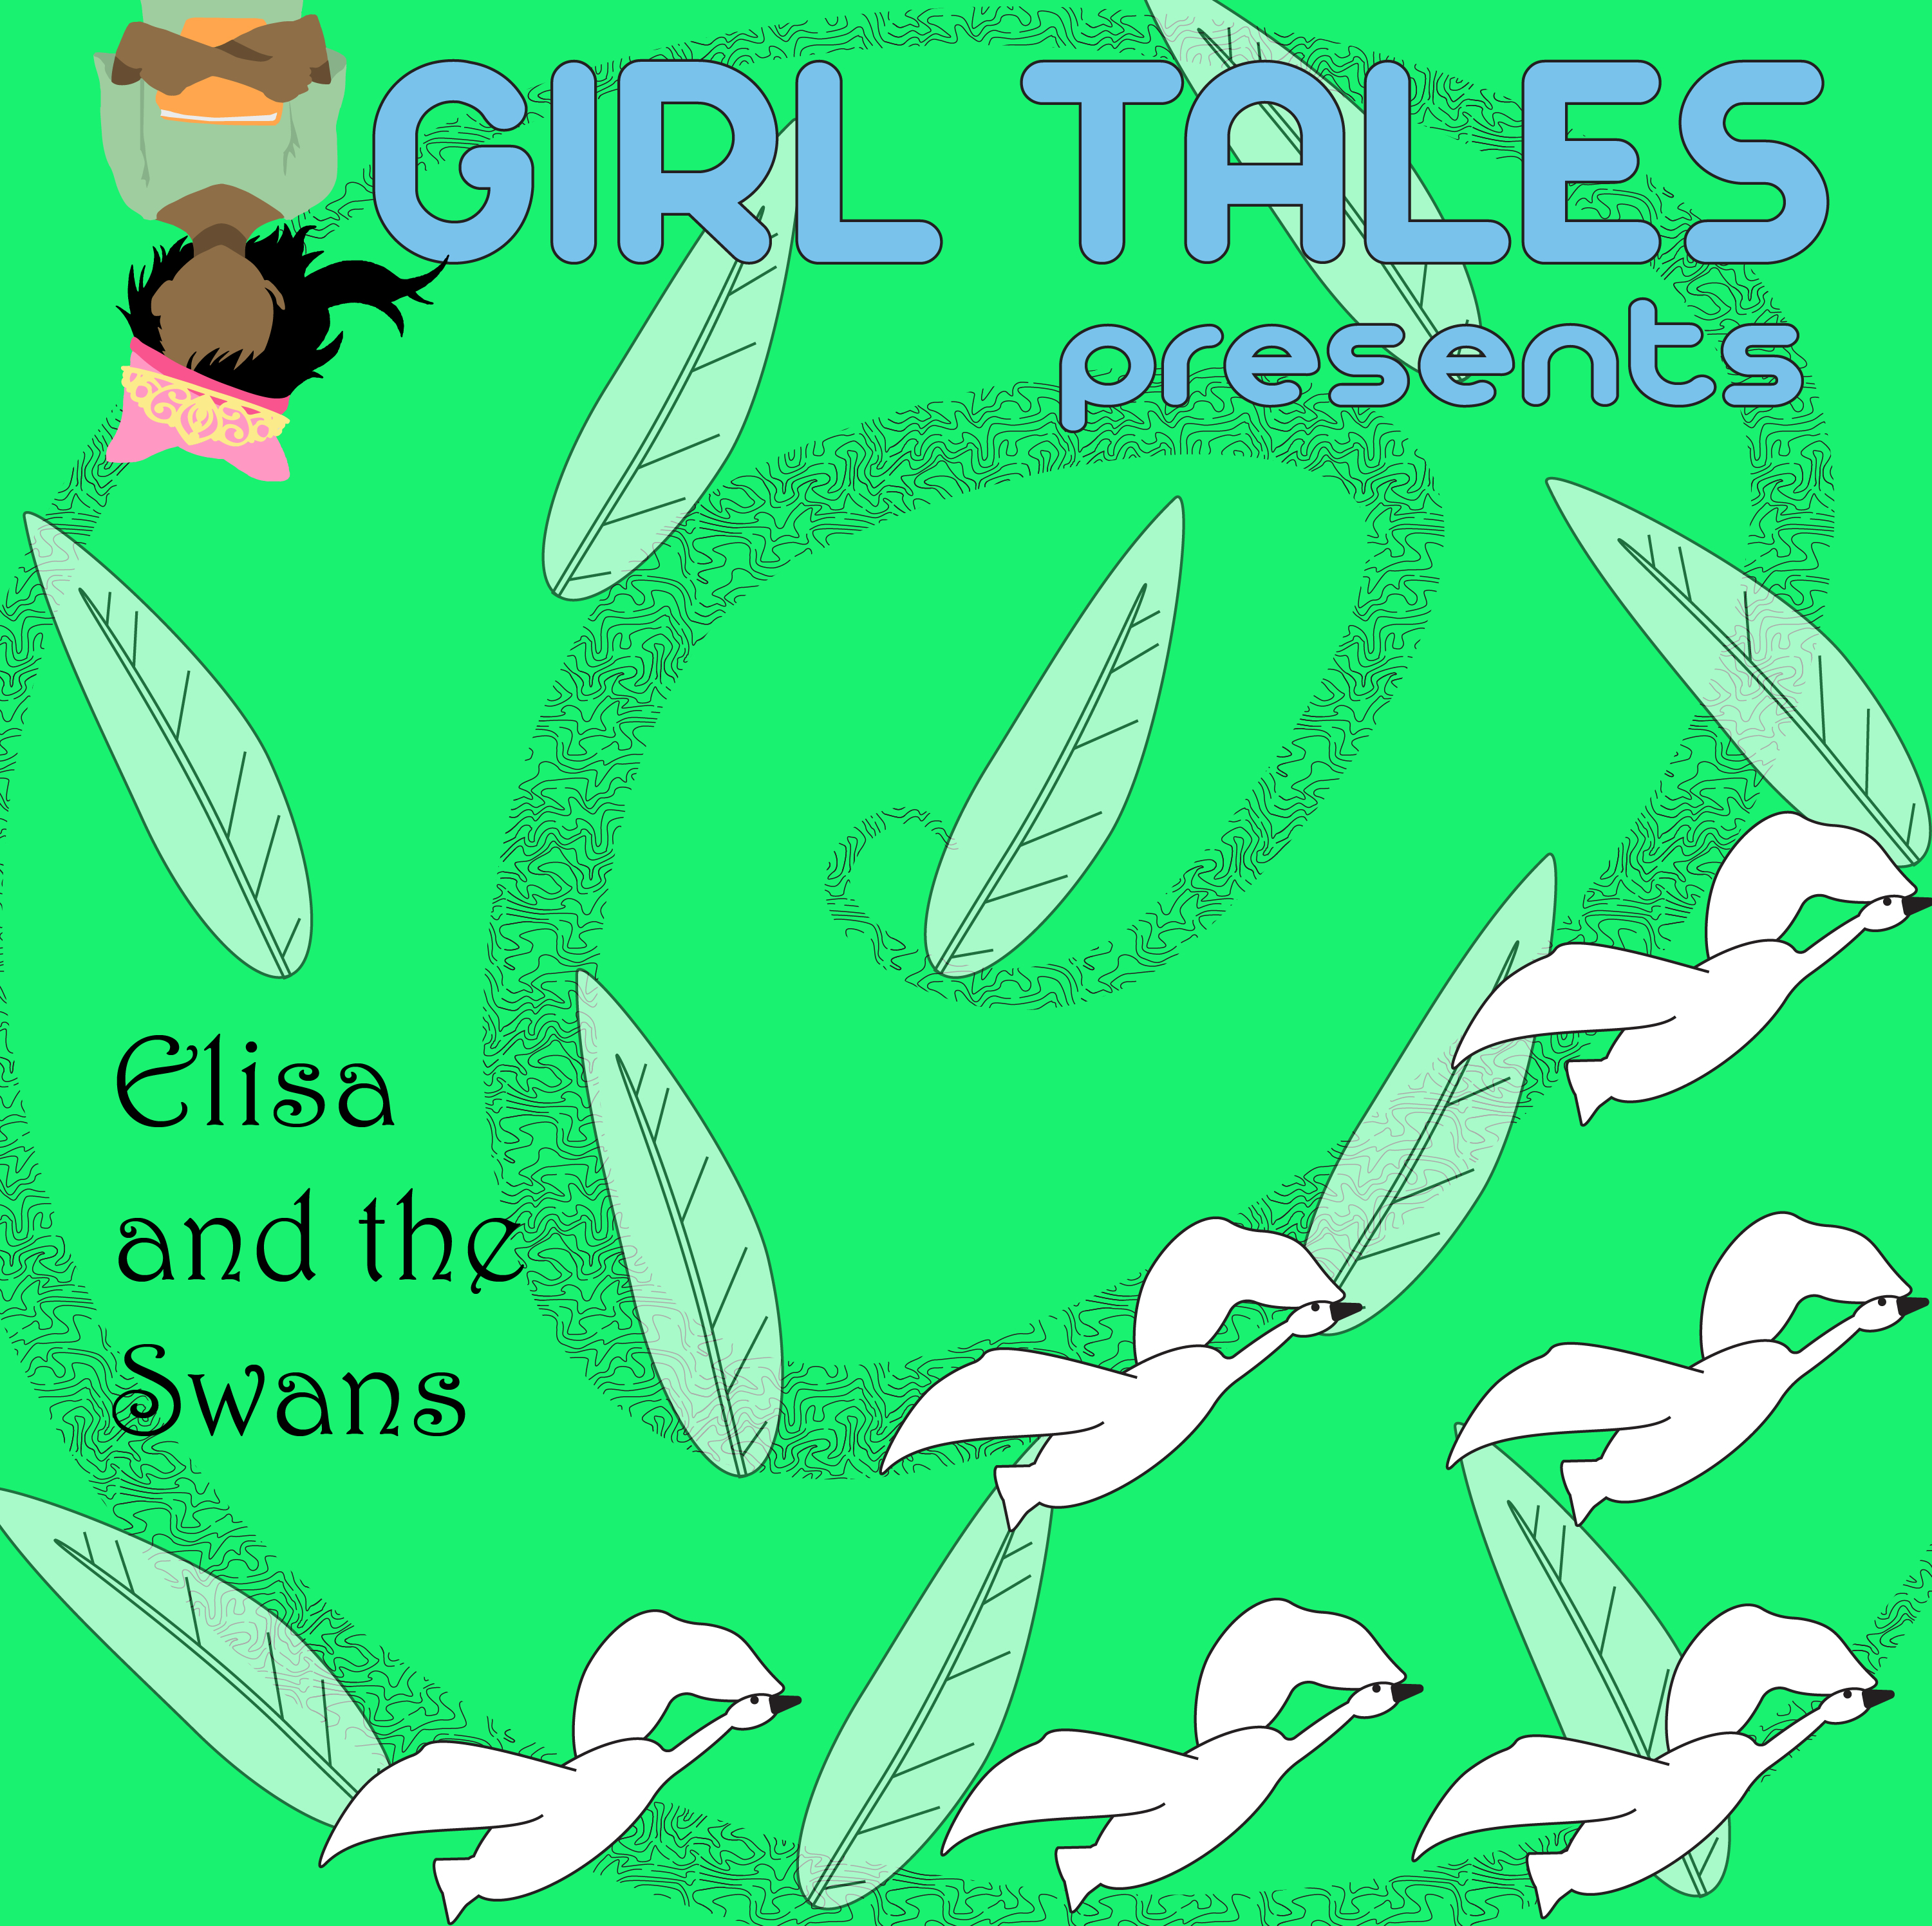 Elisa and the Swans: Part 1 by Lea McKenna-Garcia